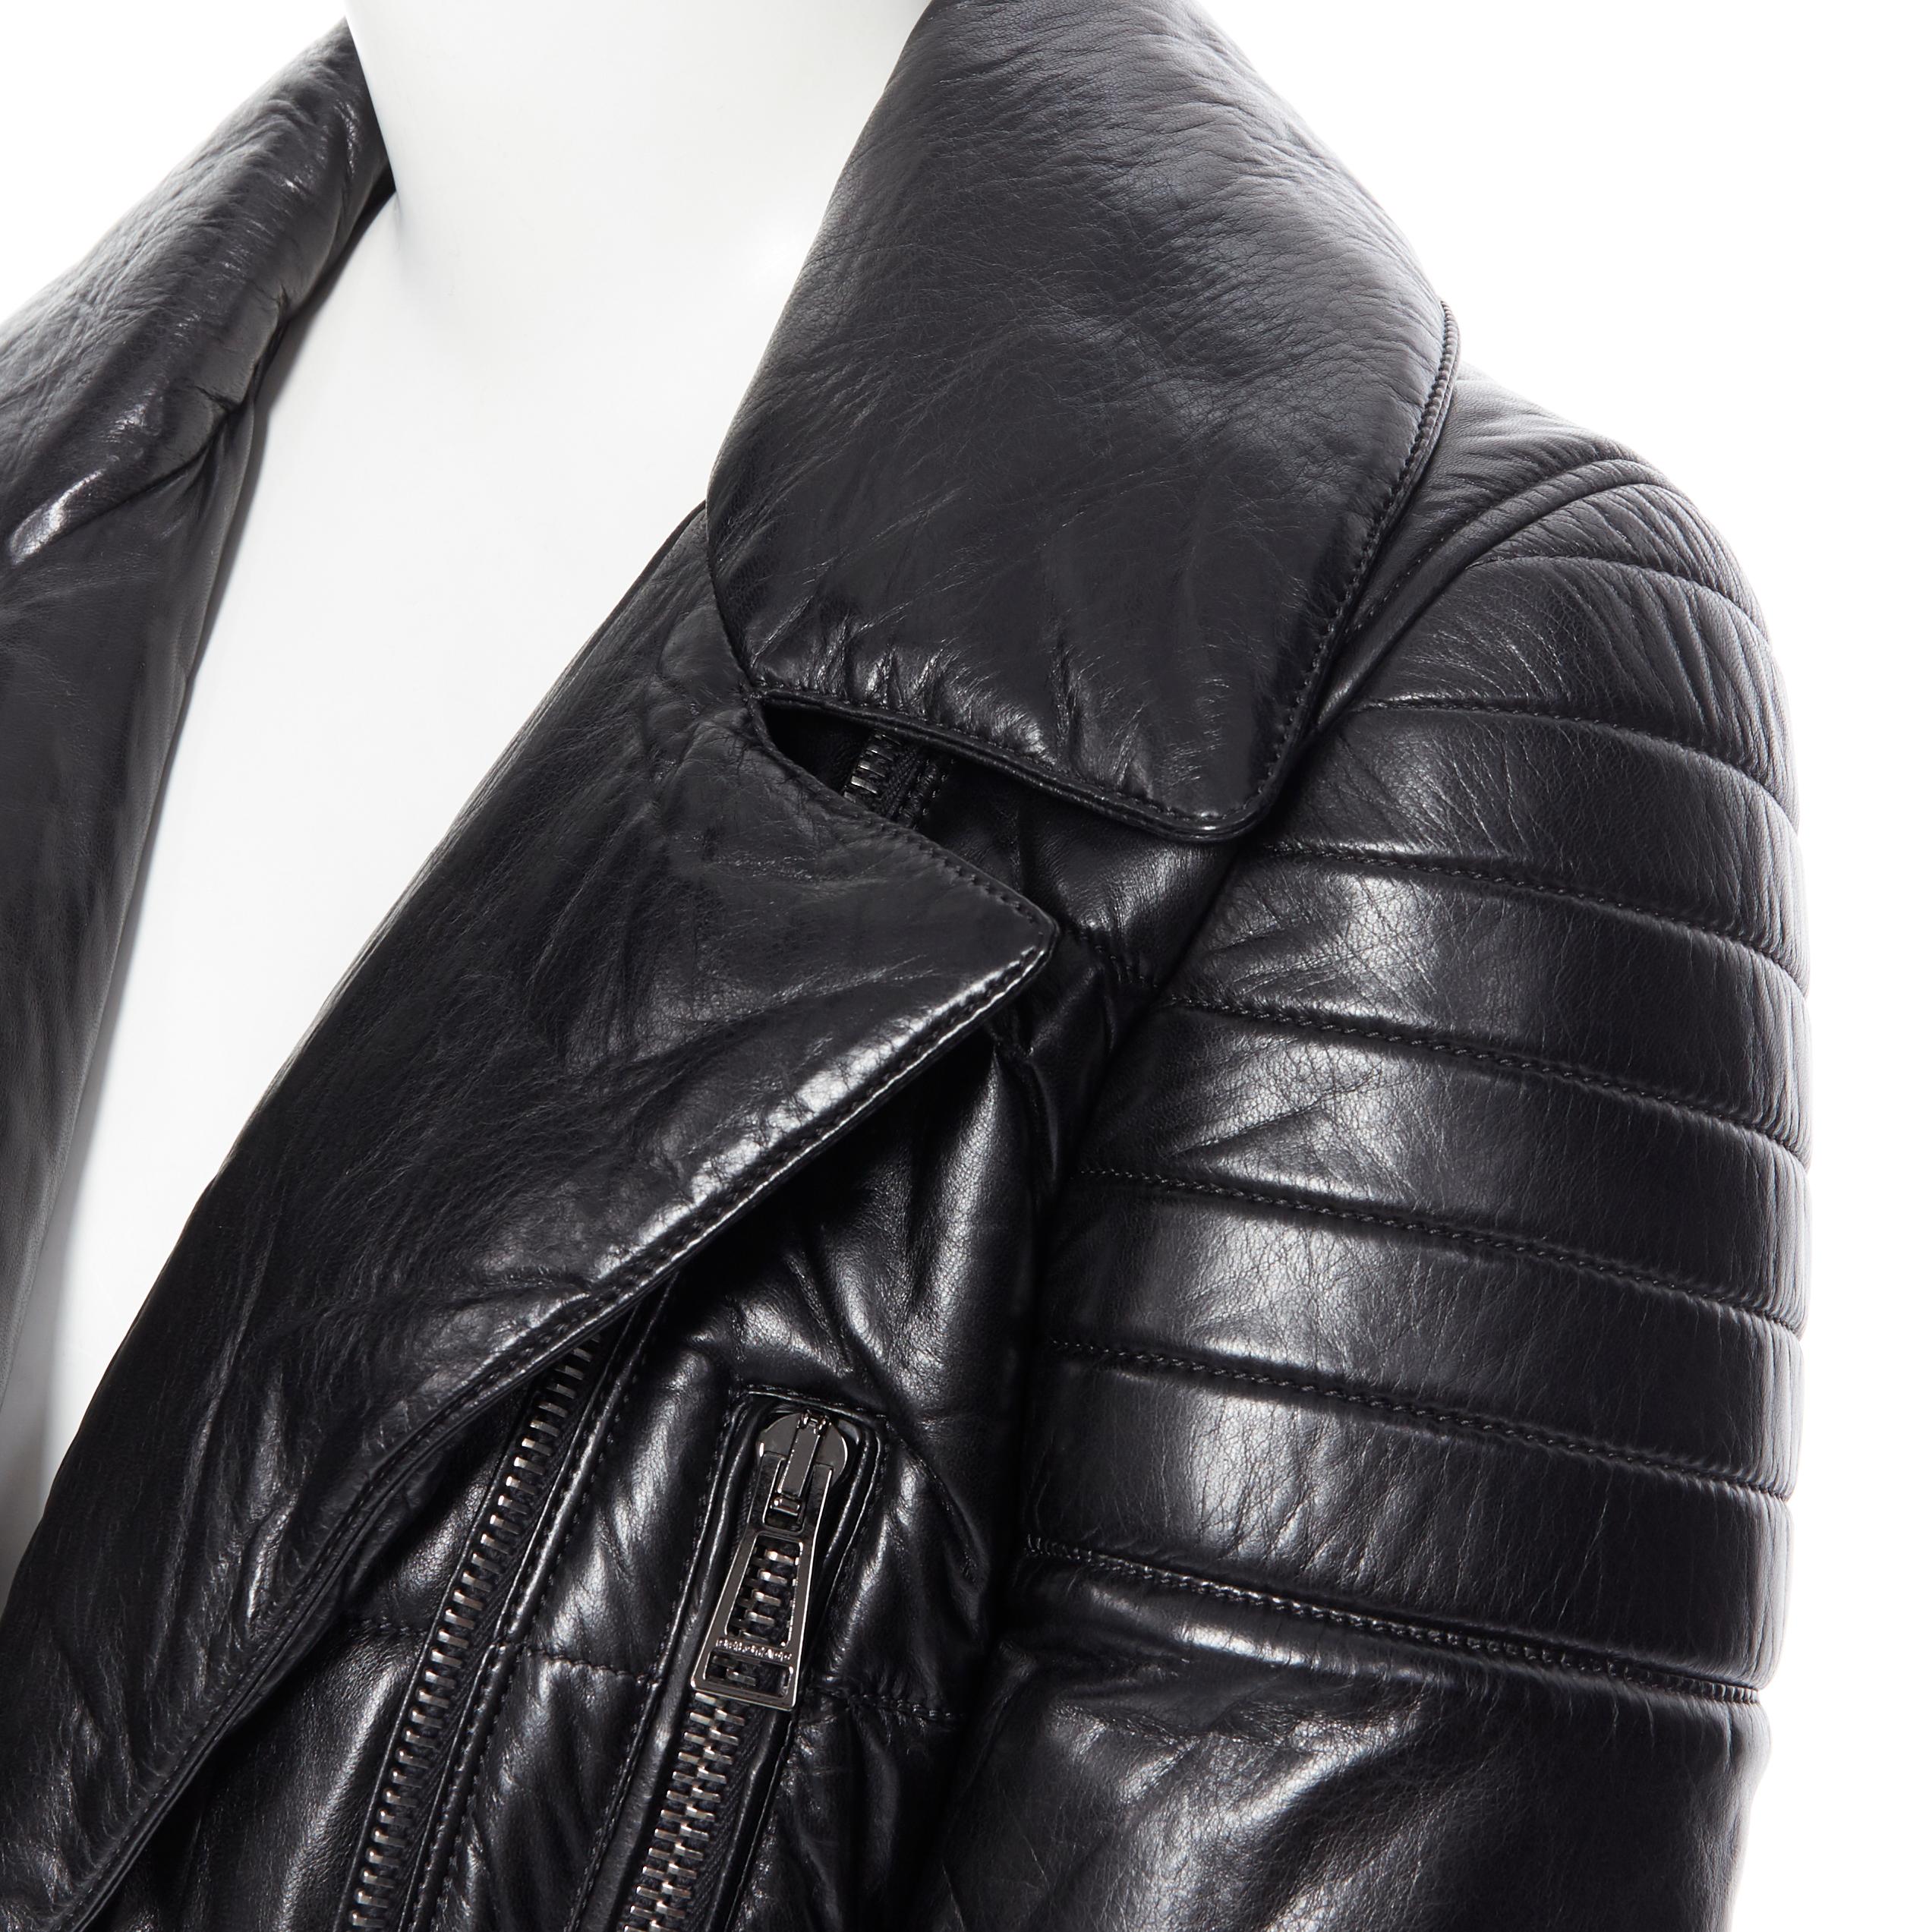 BELSTAFF 100% black leather motorcycle asymmetric zip padded winter jacket FR40 
Reference: LNKO/A01194 
Brand: Belstaff 
Material: Leather 
Color: Black 
Pattern: Solid 
Closure: Zip 
Extra Detail: Lightly padded leather jacket. Gunmetal silver